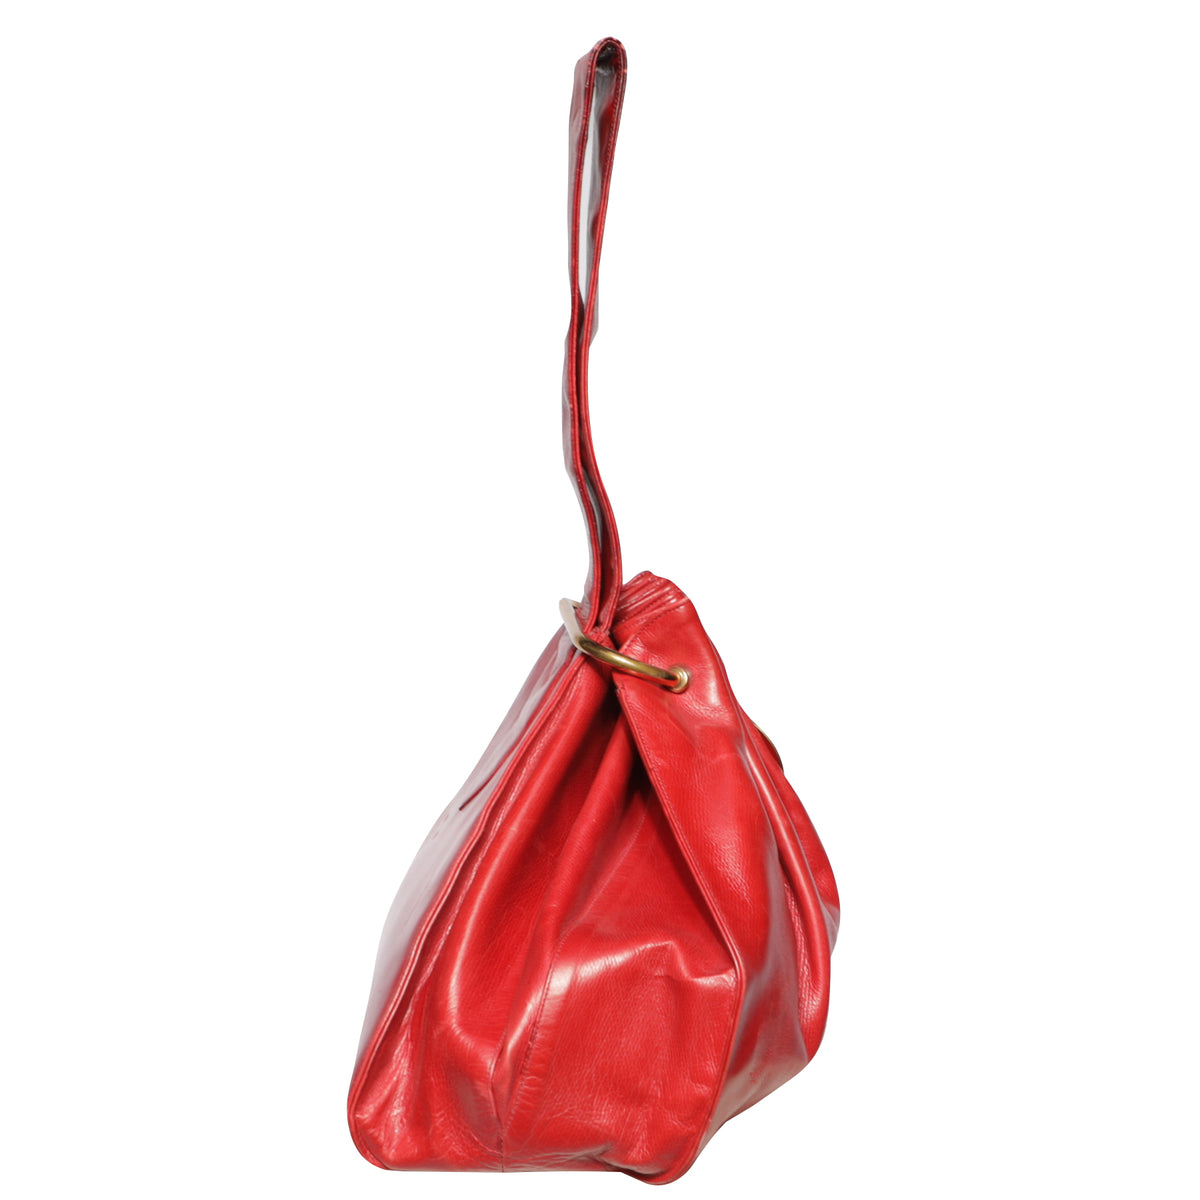 Vintage 1960s Koret Red Leather Trapezoid Pouch Bag